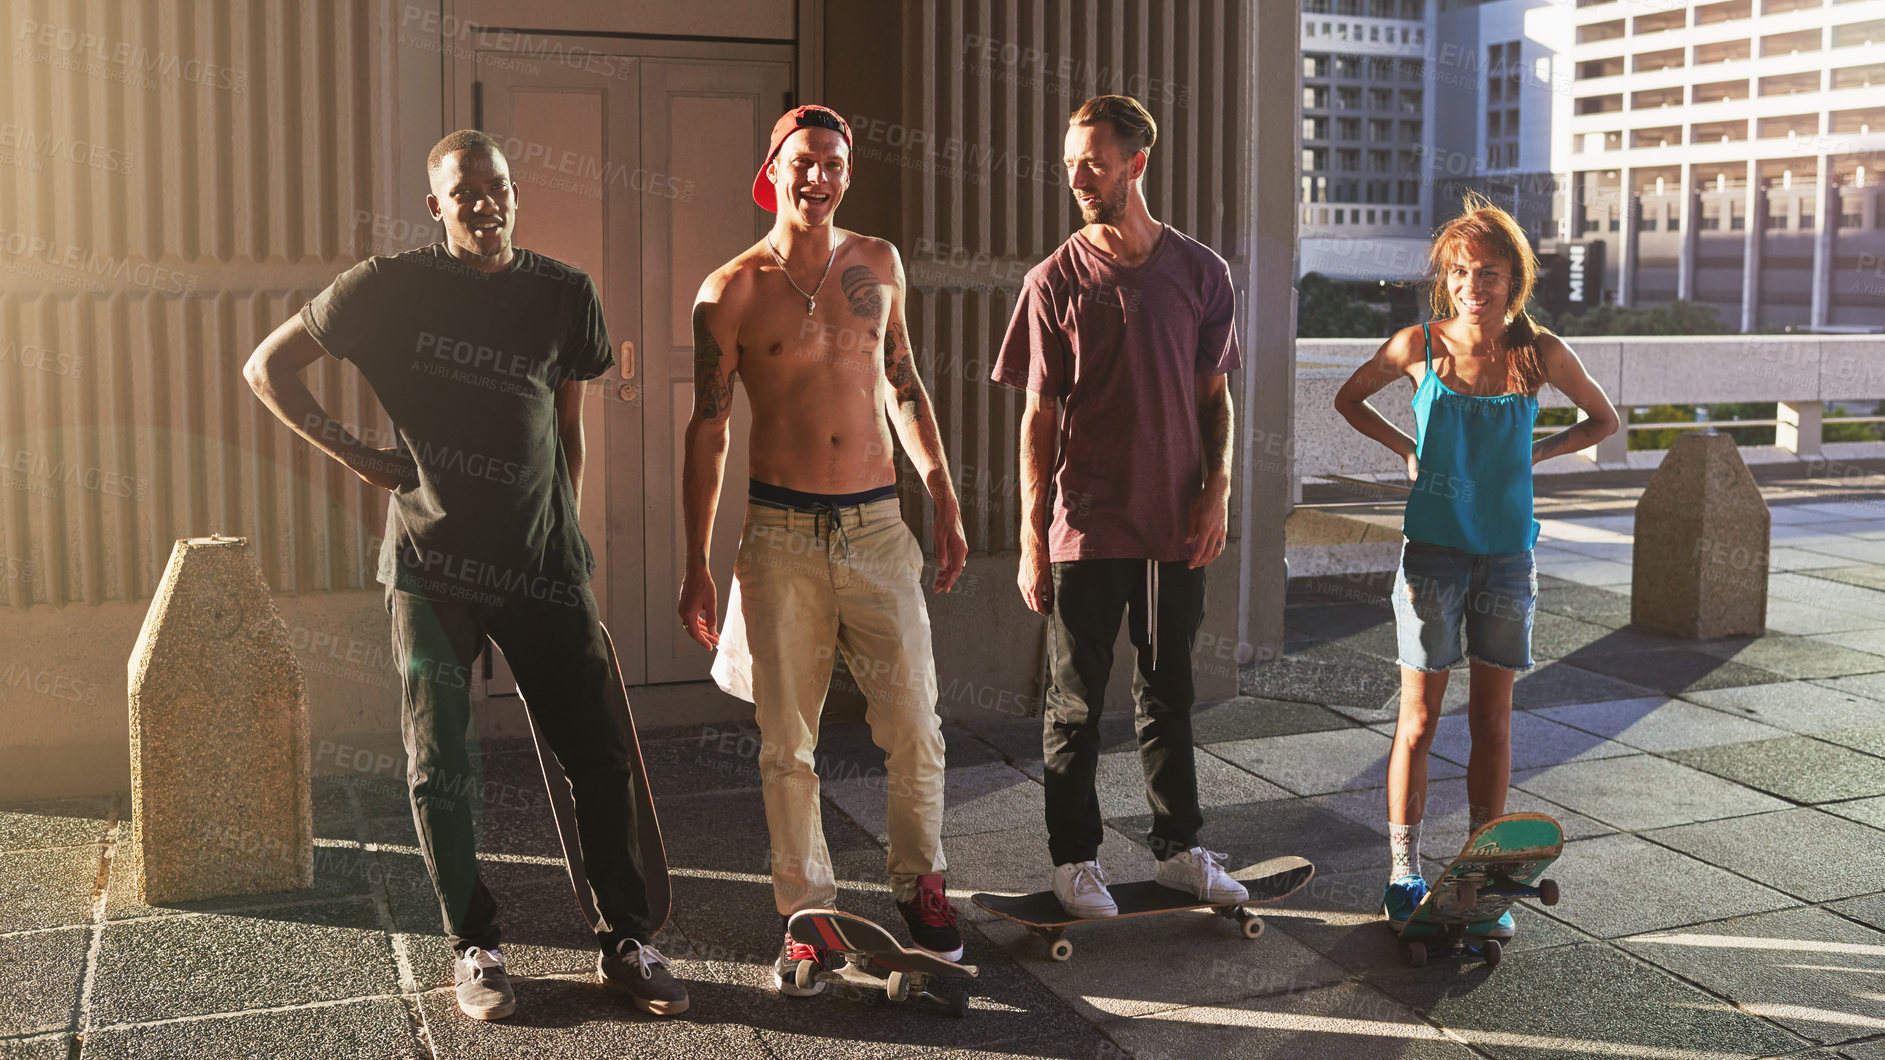 Buy stock photo Shot of a group of skaters standing together